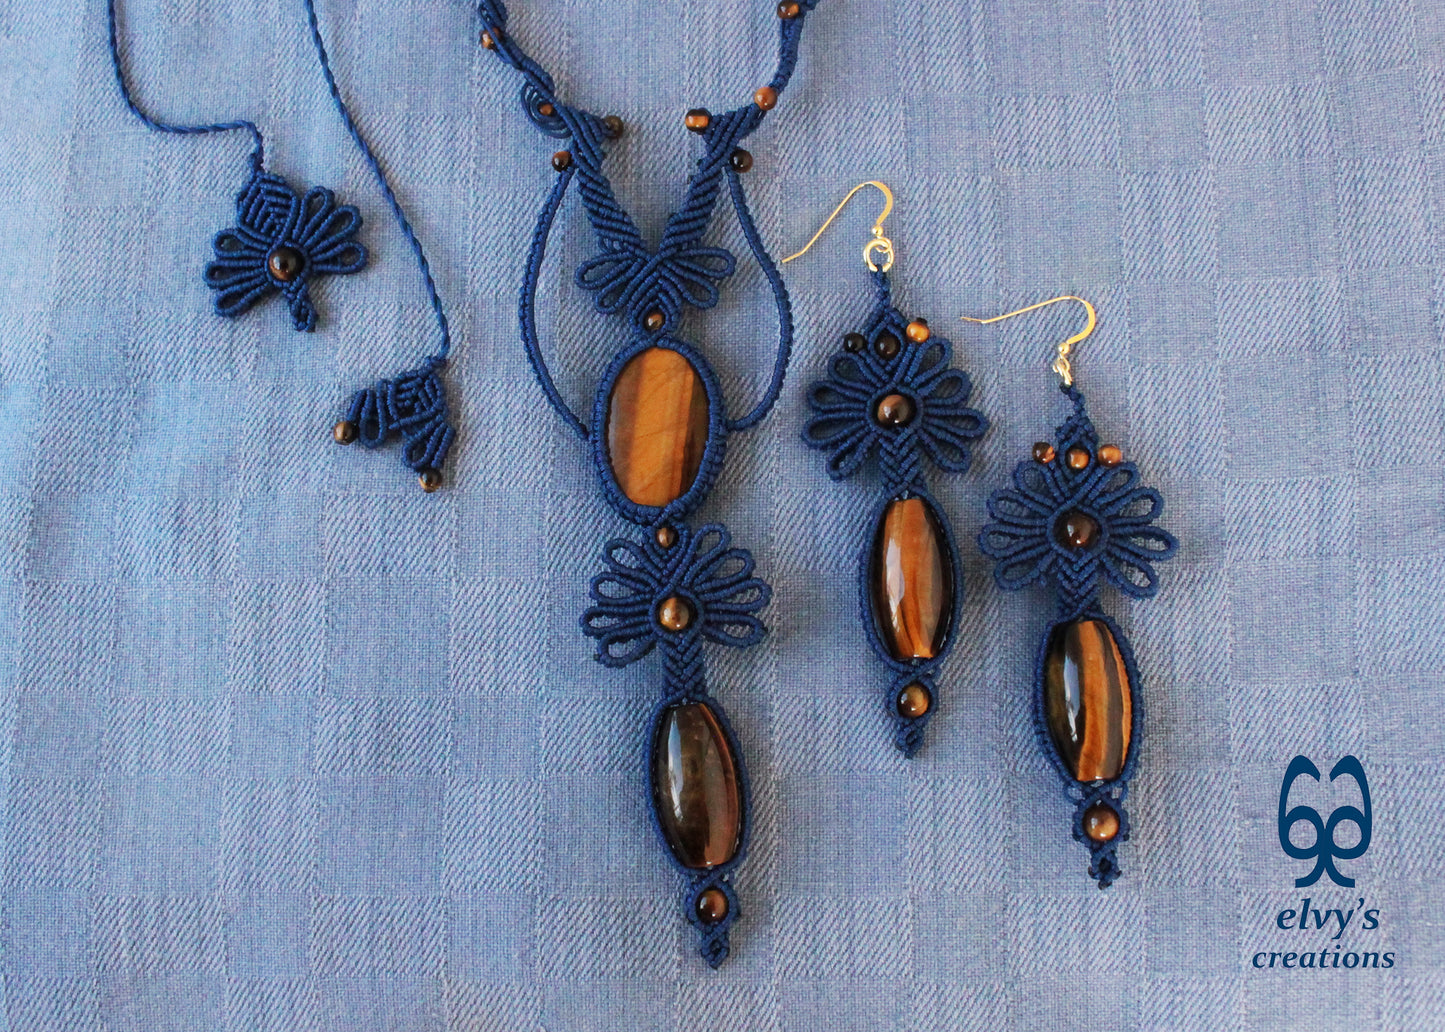 Blue Jewelry Set with Tiger Eye Gemstones Macrame Necklace and Earrings 